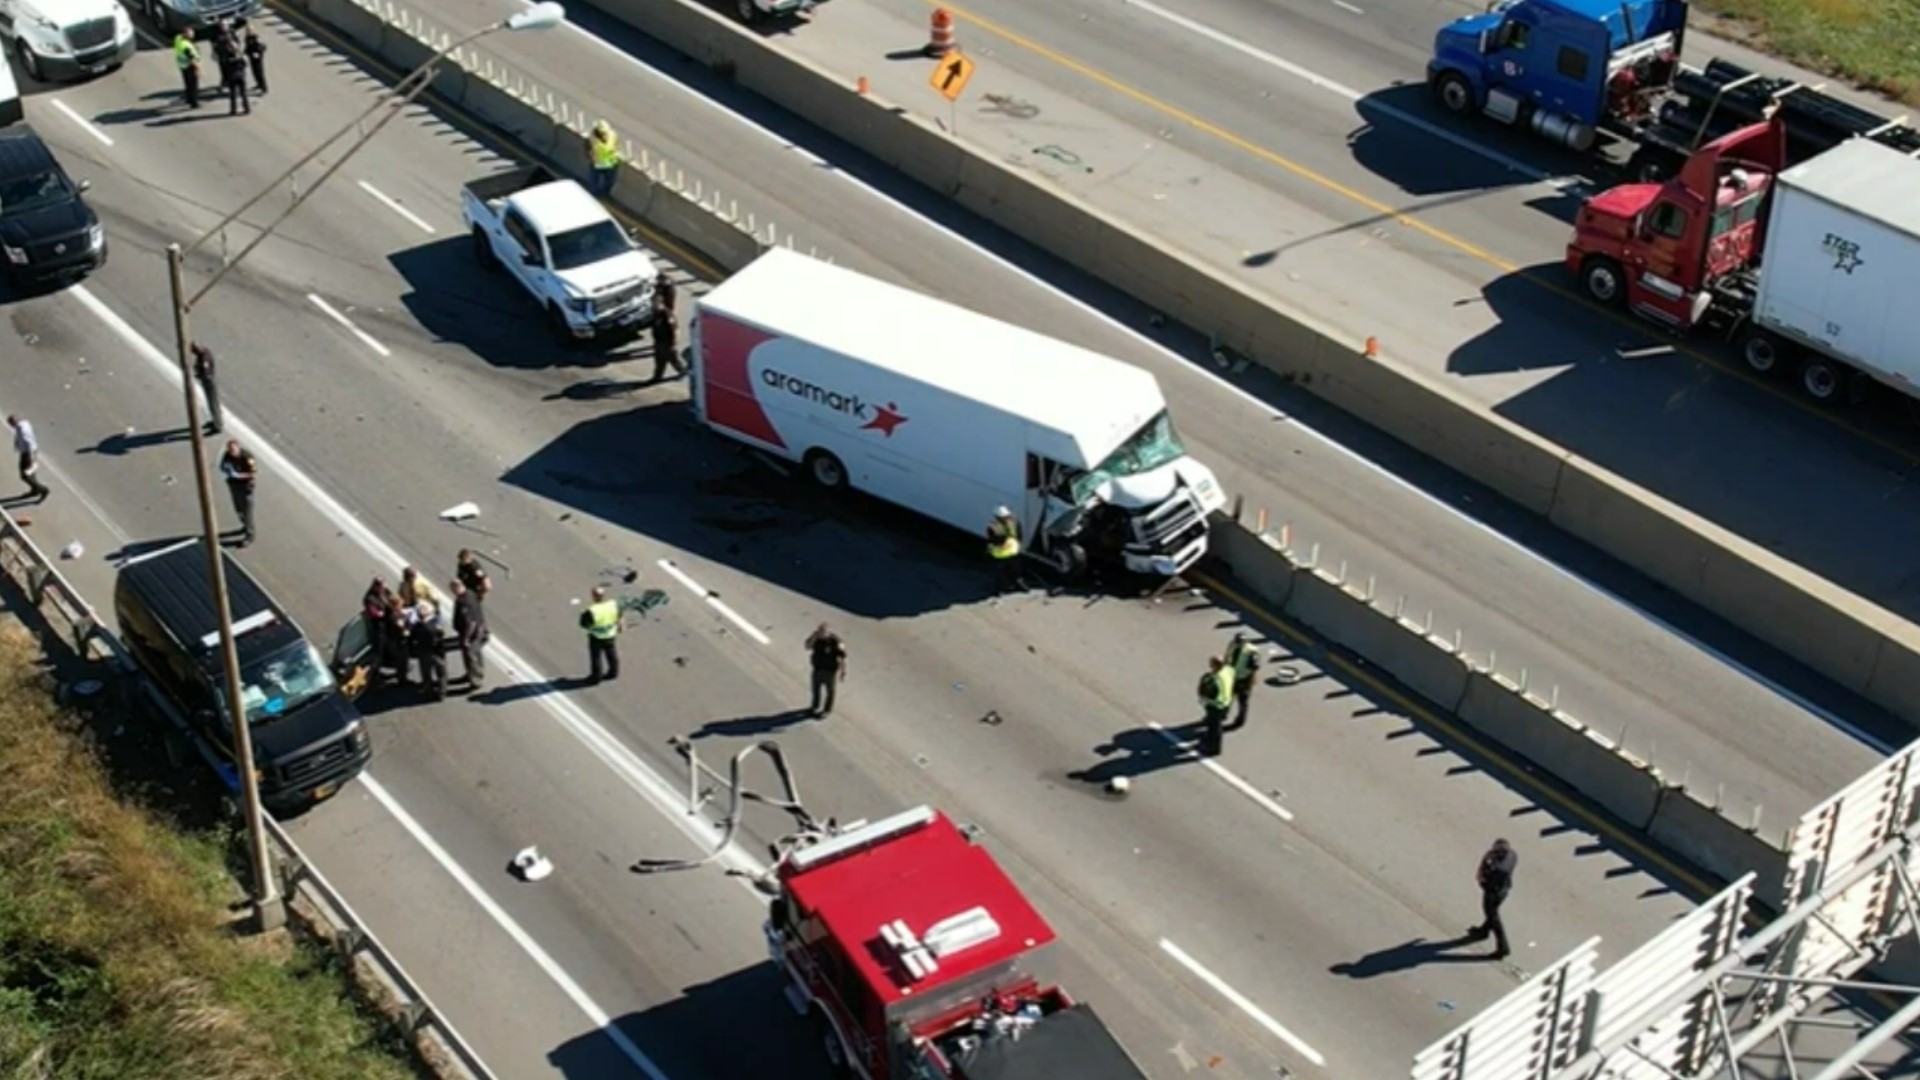 The Ohio State Highway Patrol said the crash on I-75 south of the exit for the University of Dayton was reported shortly after 11 a.m. Monday.